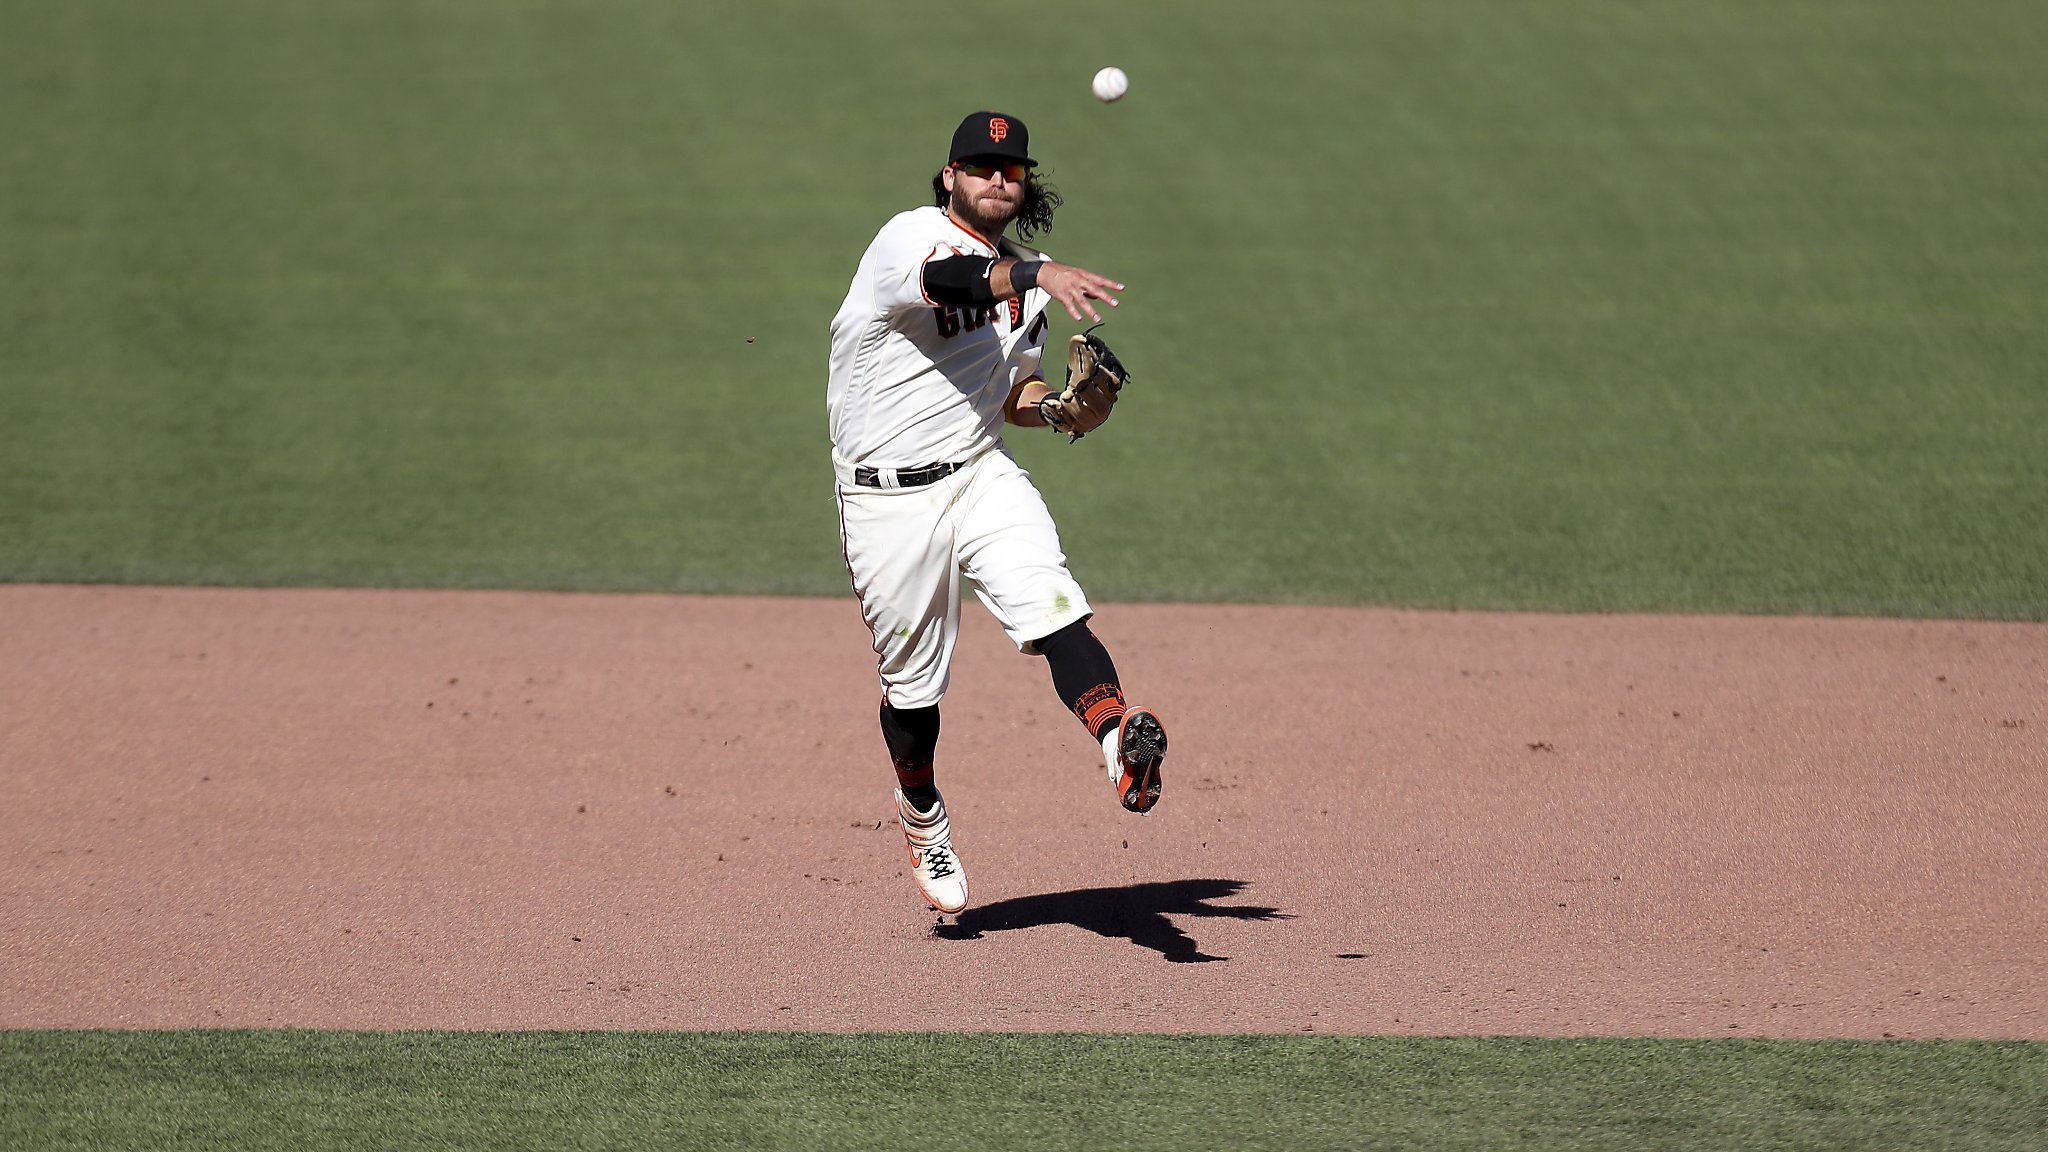 Will 2021 be swan song for Giants' threesome of Buster Posey